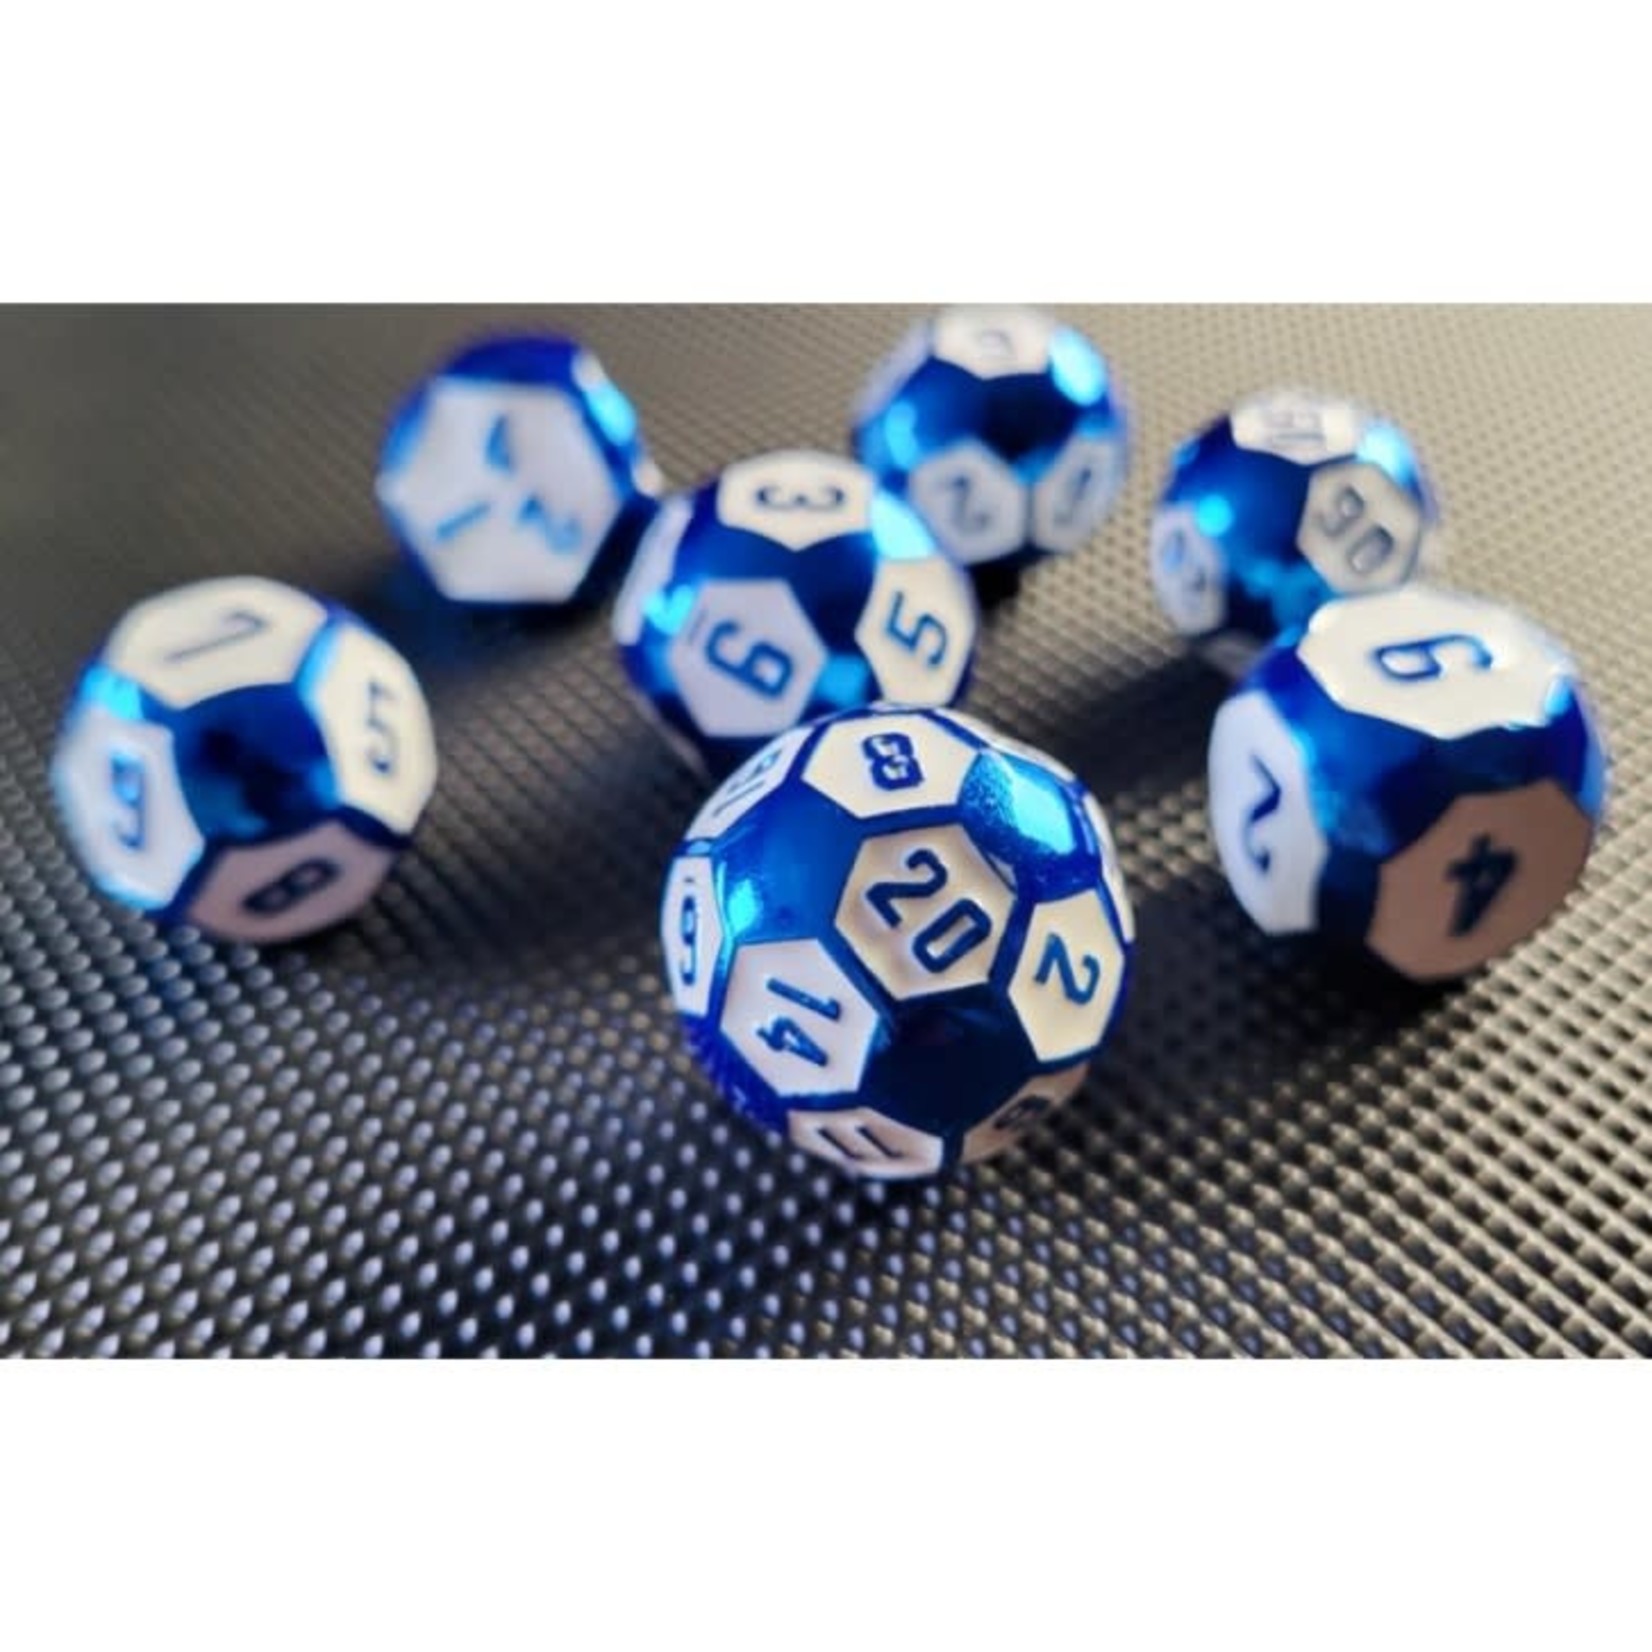 Forged Gaming Set of 7 Metal Dice: Android Core